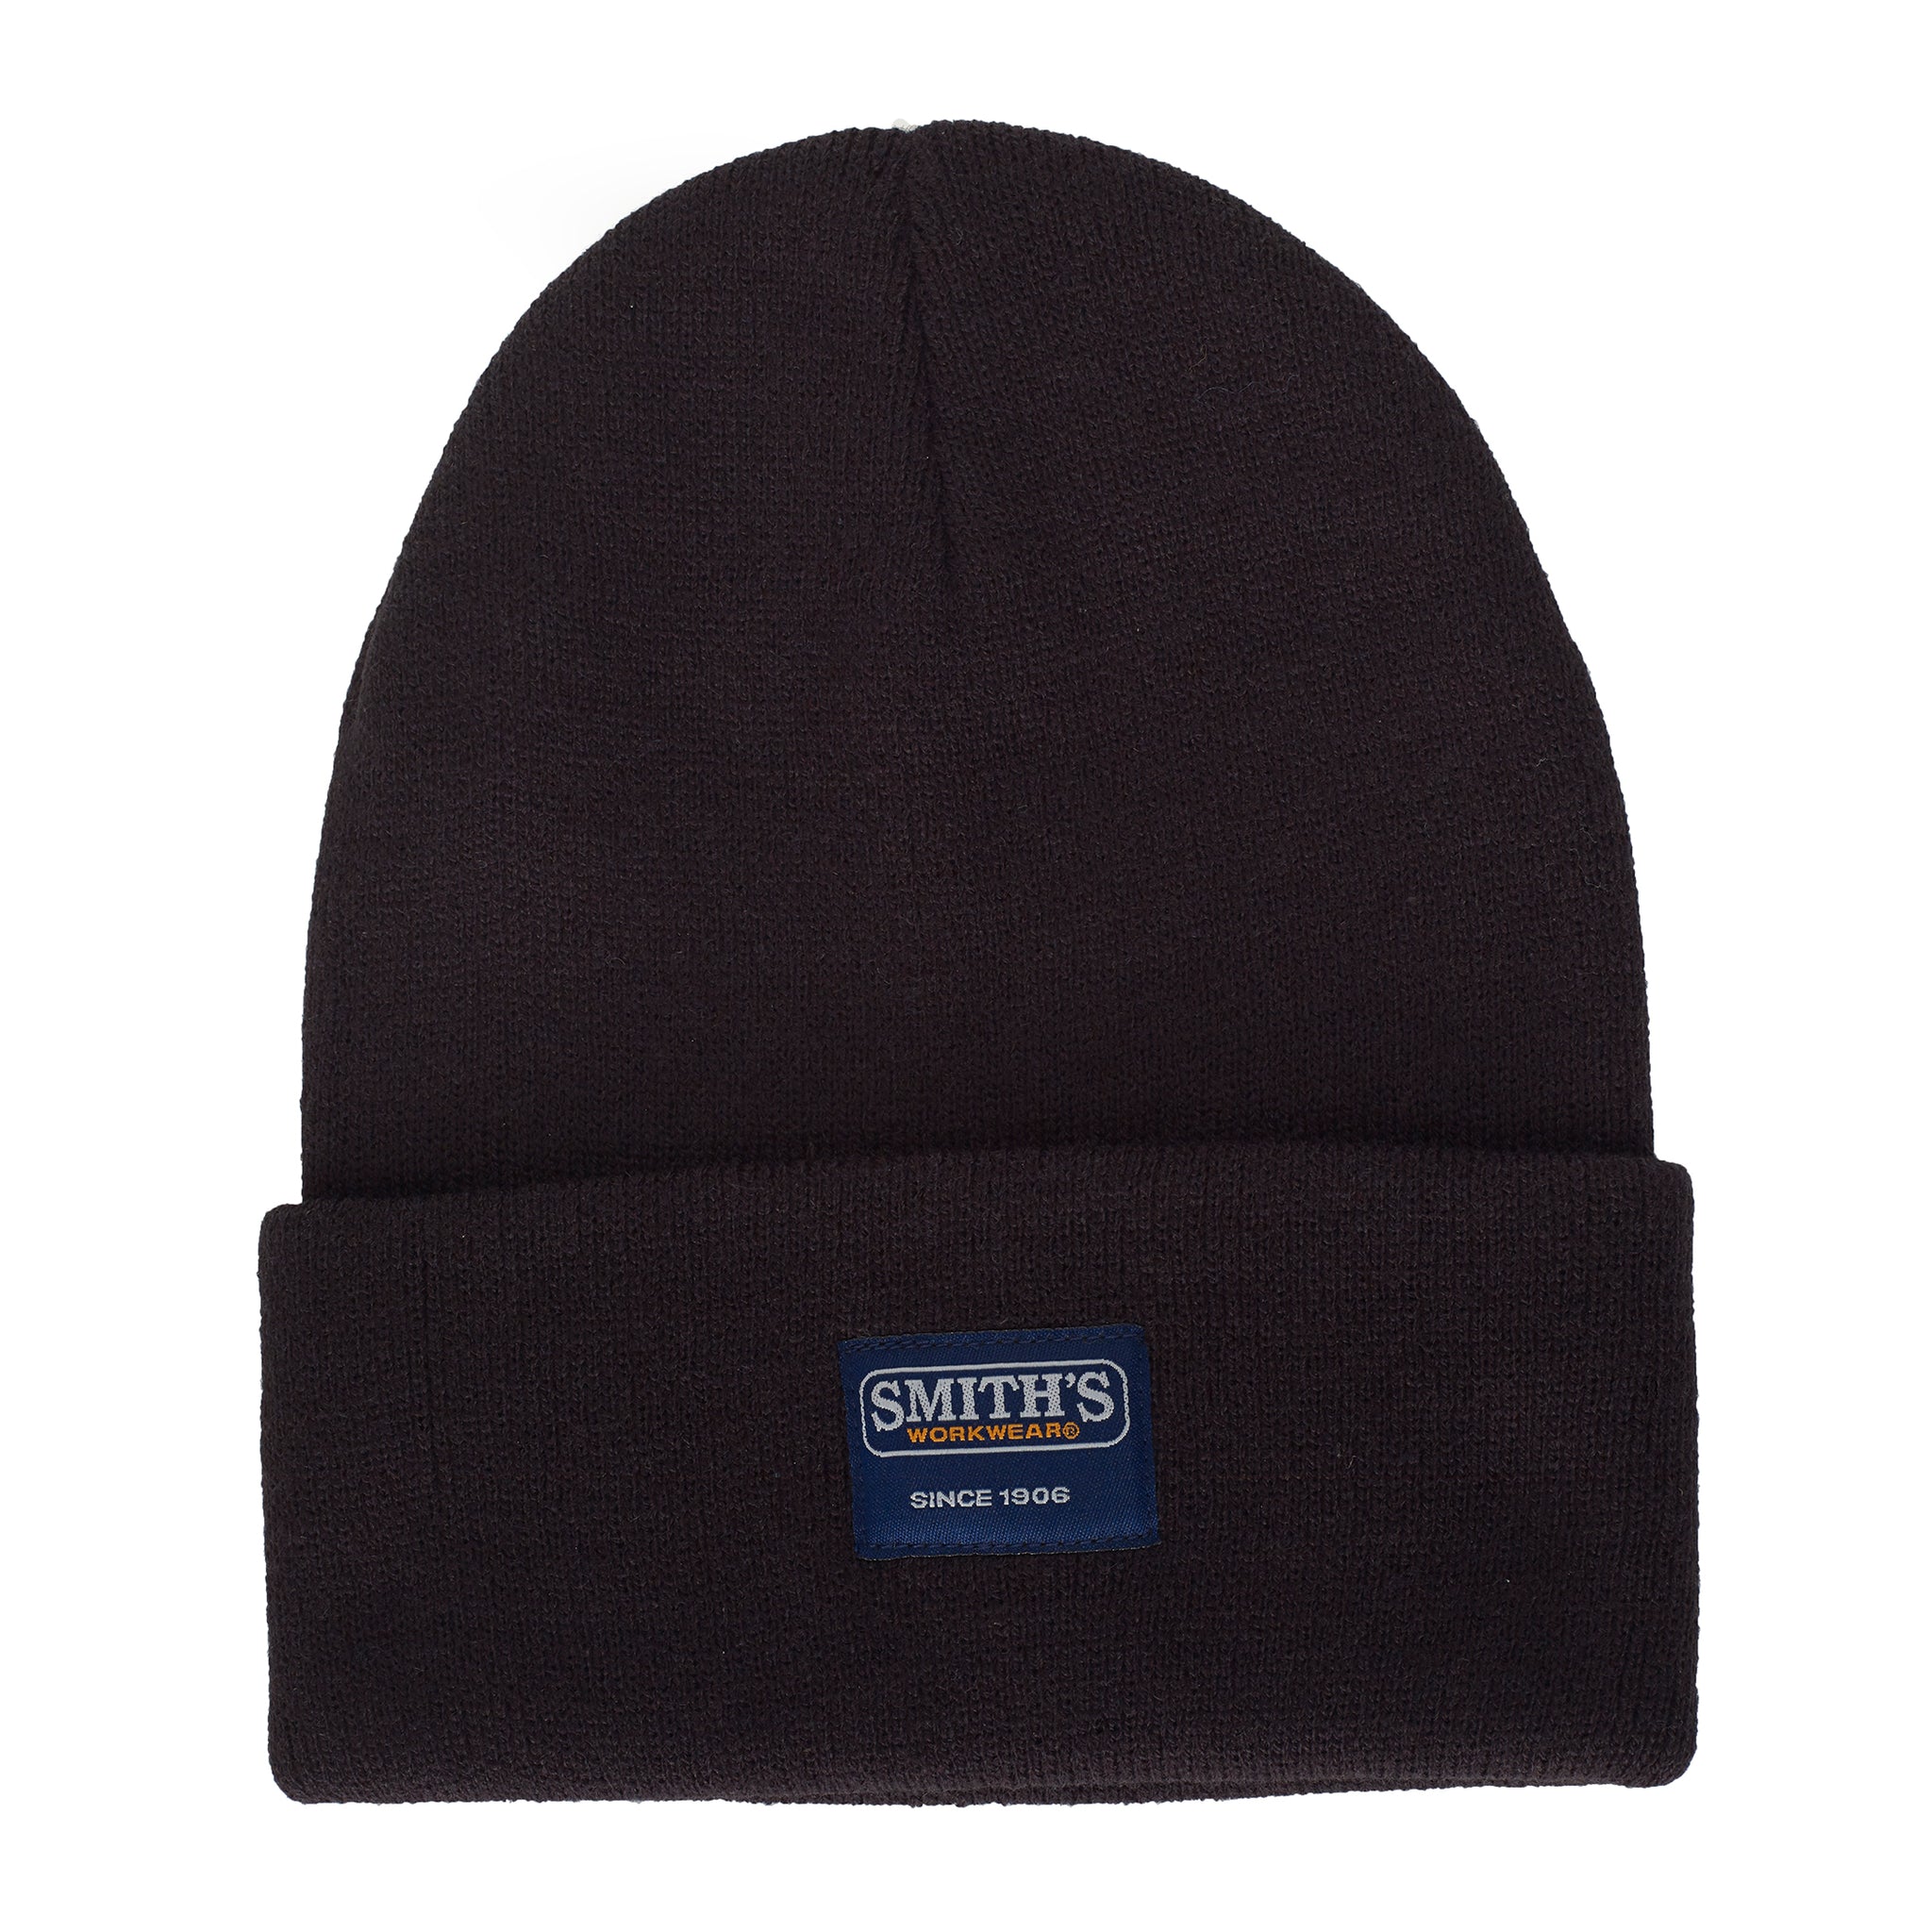 PULL-ON KNIT BEANIE